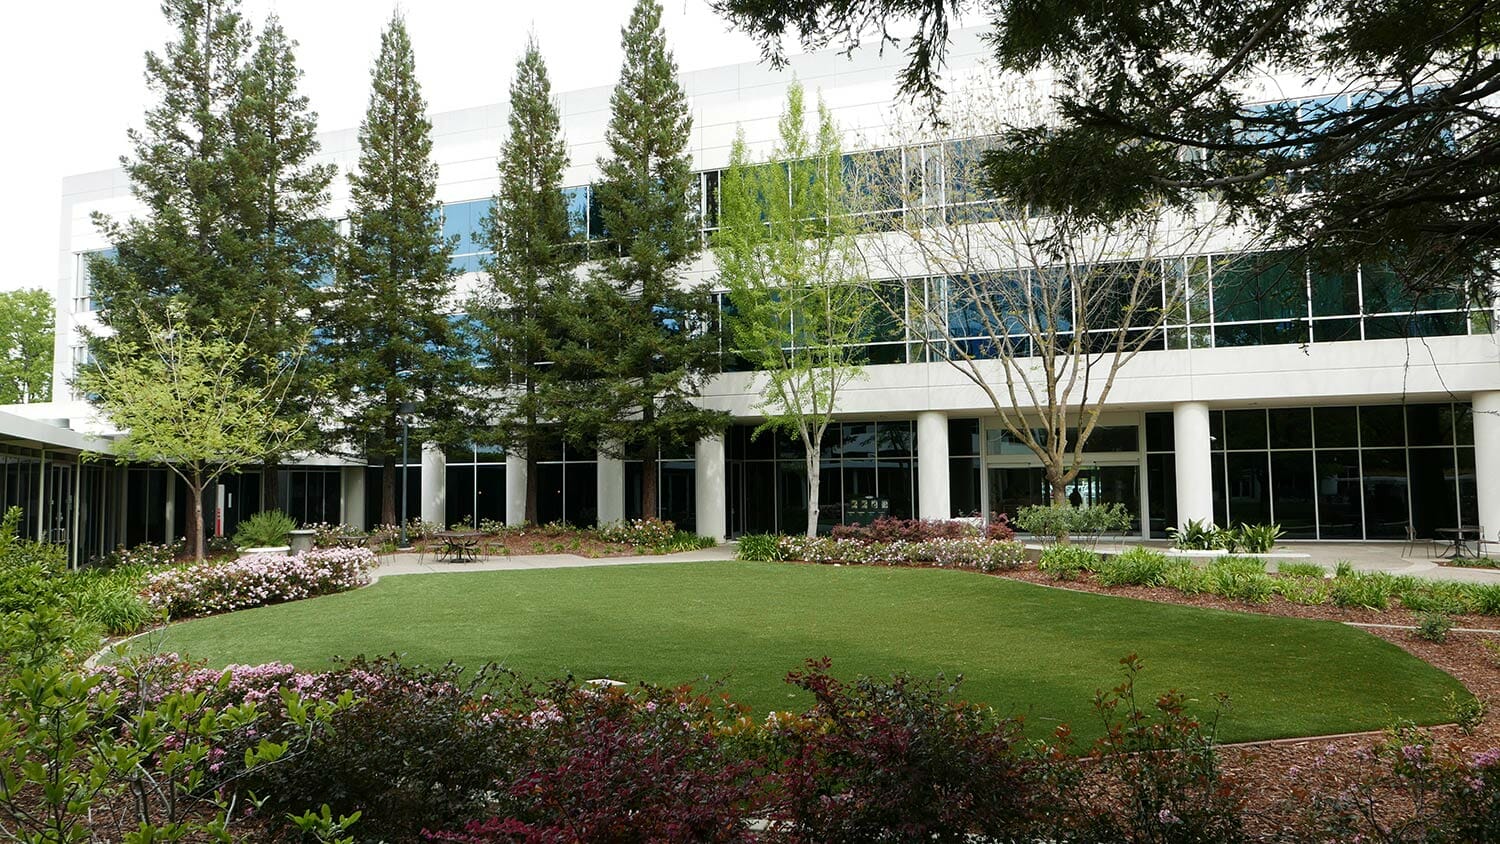 Commercial Artificial Turf Installation for Corporate Landscaping - Rancho Cordova, CA